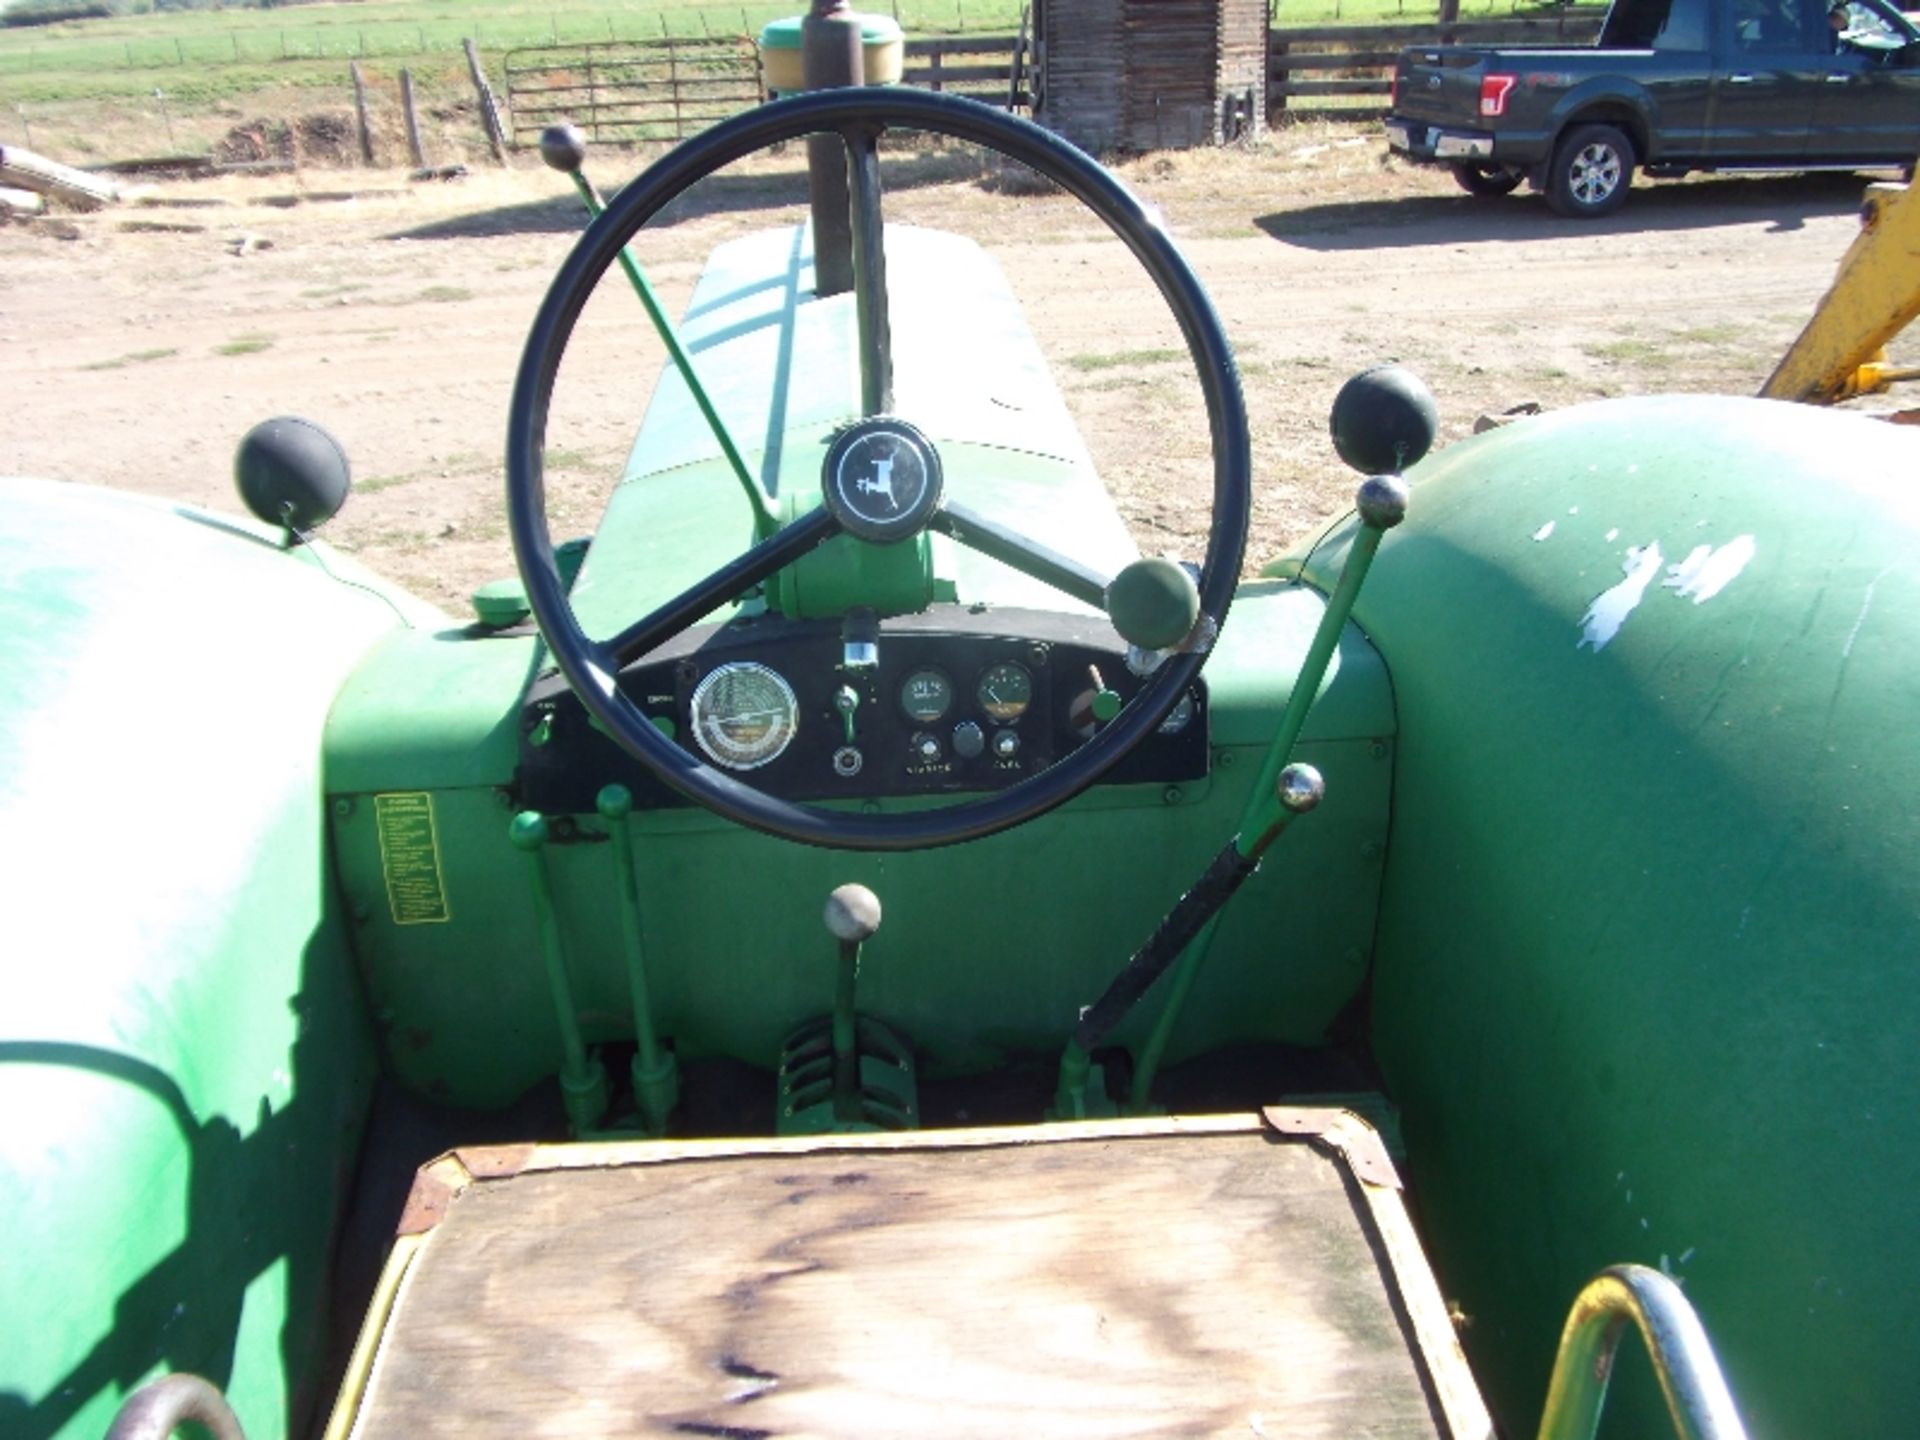 JD 820 diesel power steering 2 hyd remotes wide front pony start ser# 820491A 5299 hrs - Image 4 of 11